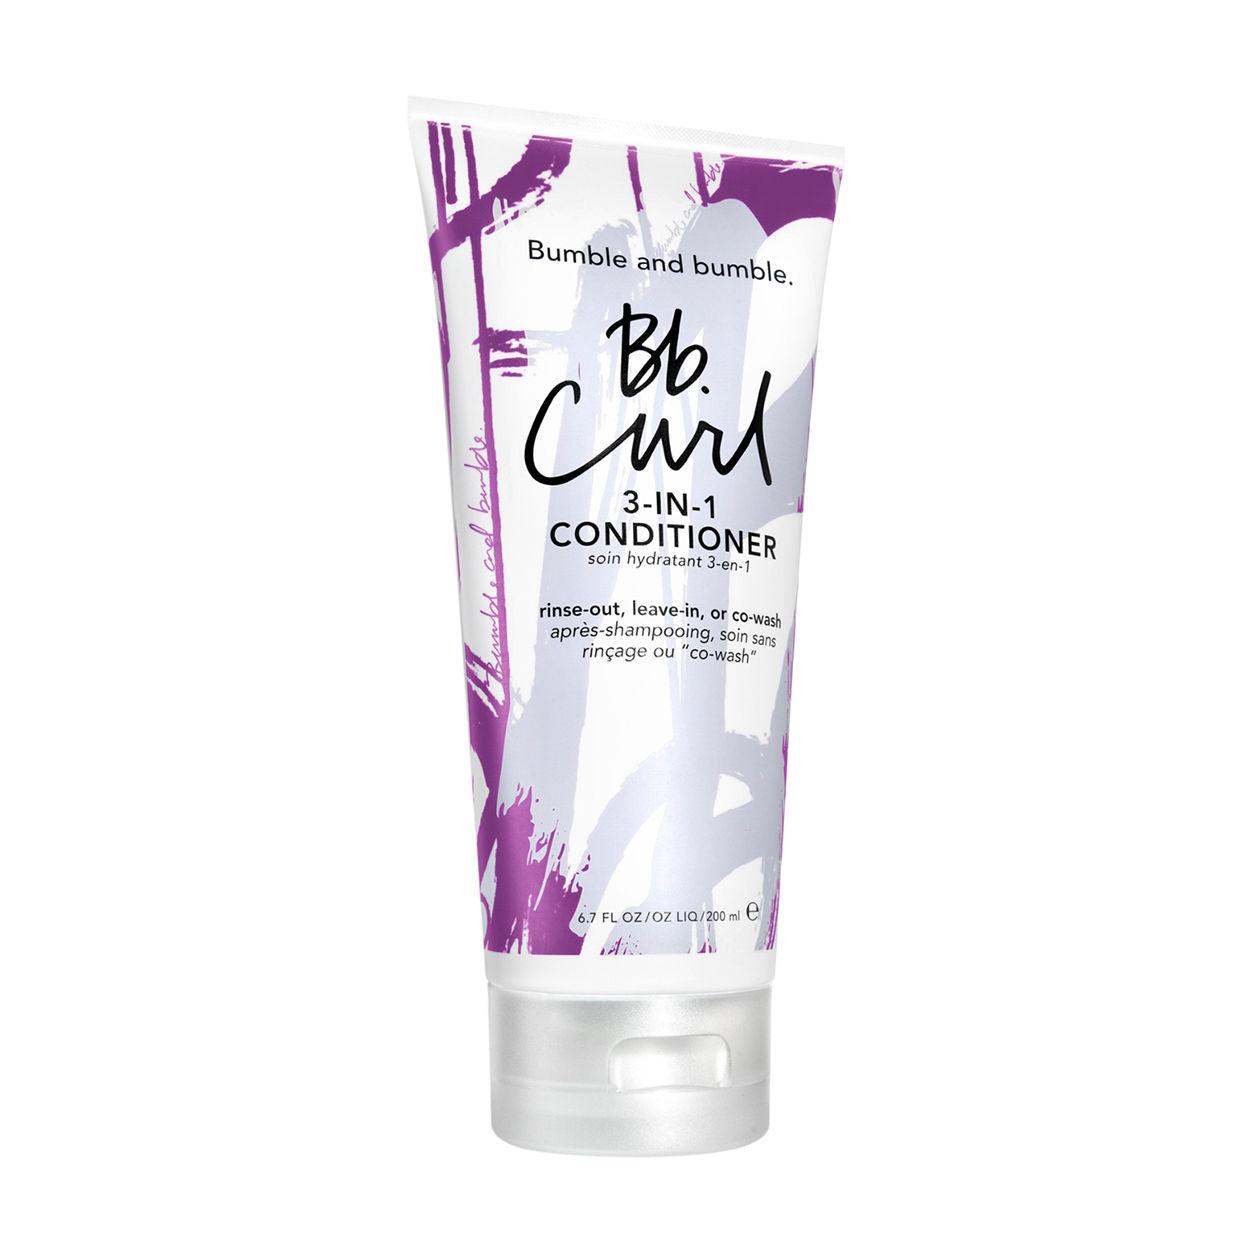 Bumble and Bumble Curl 3-in-1 Conditioner main image